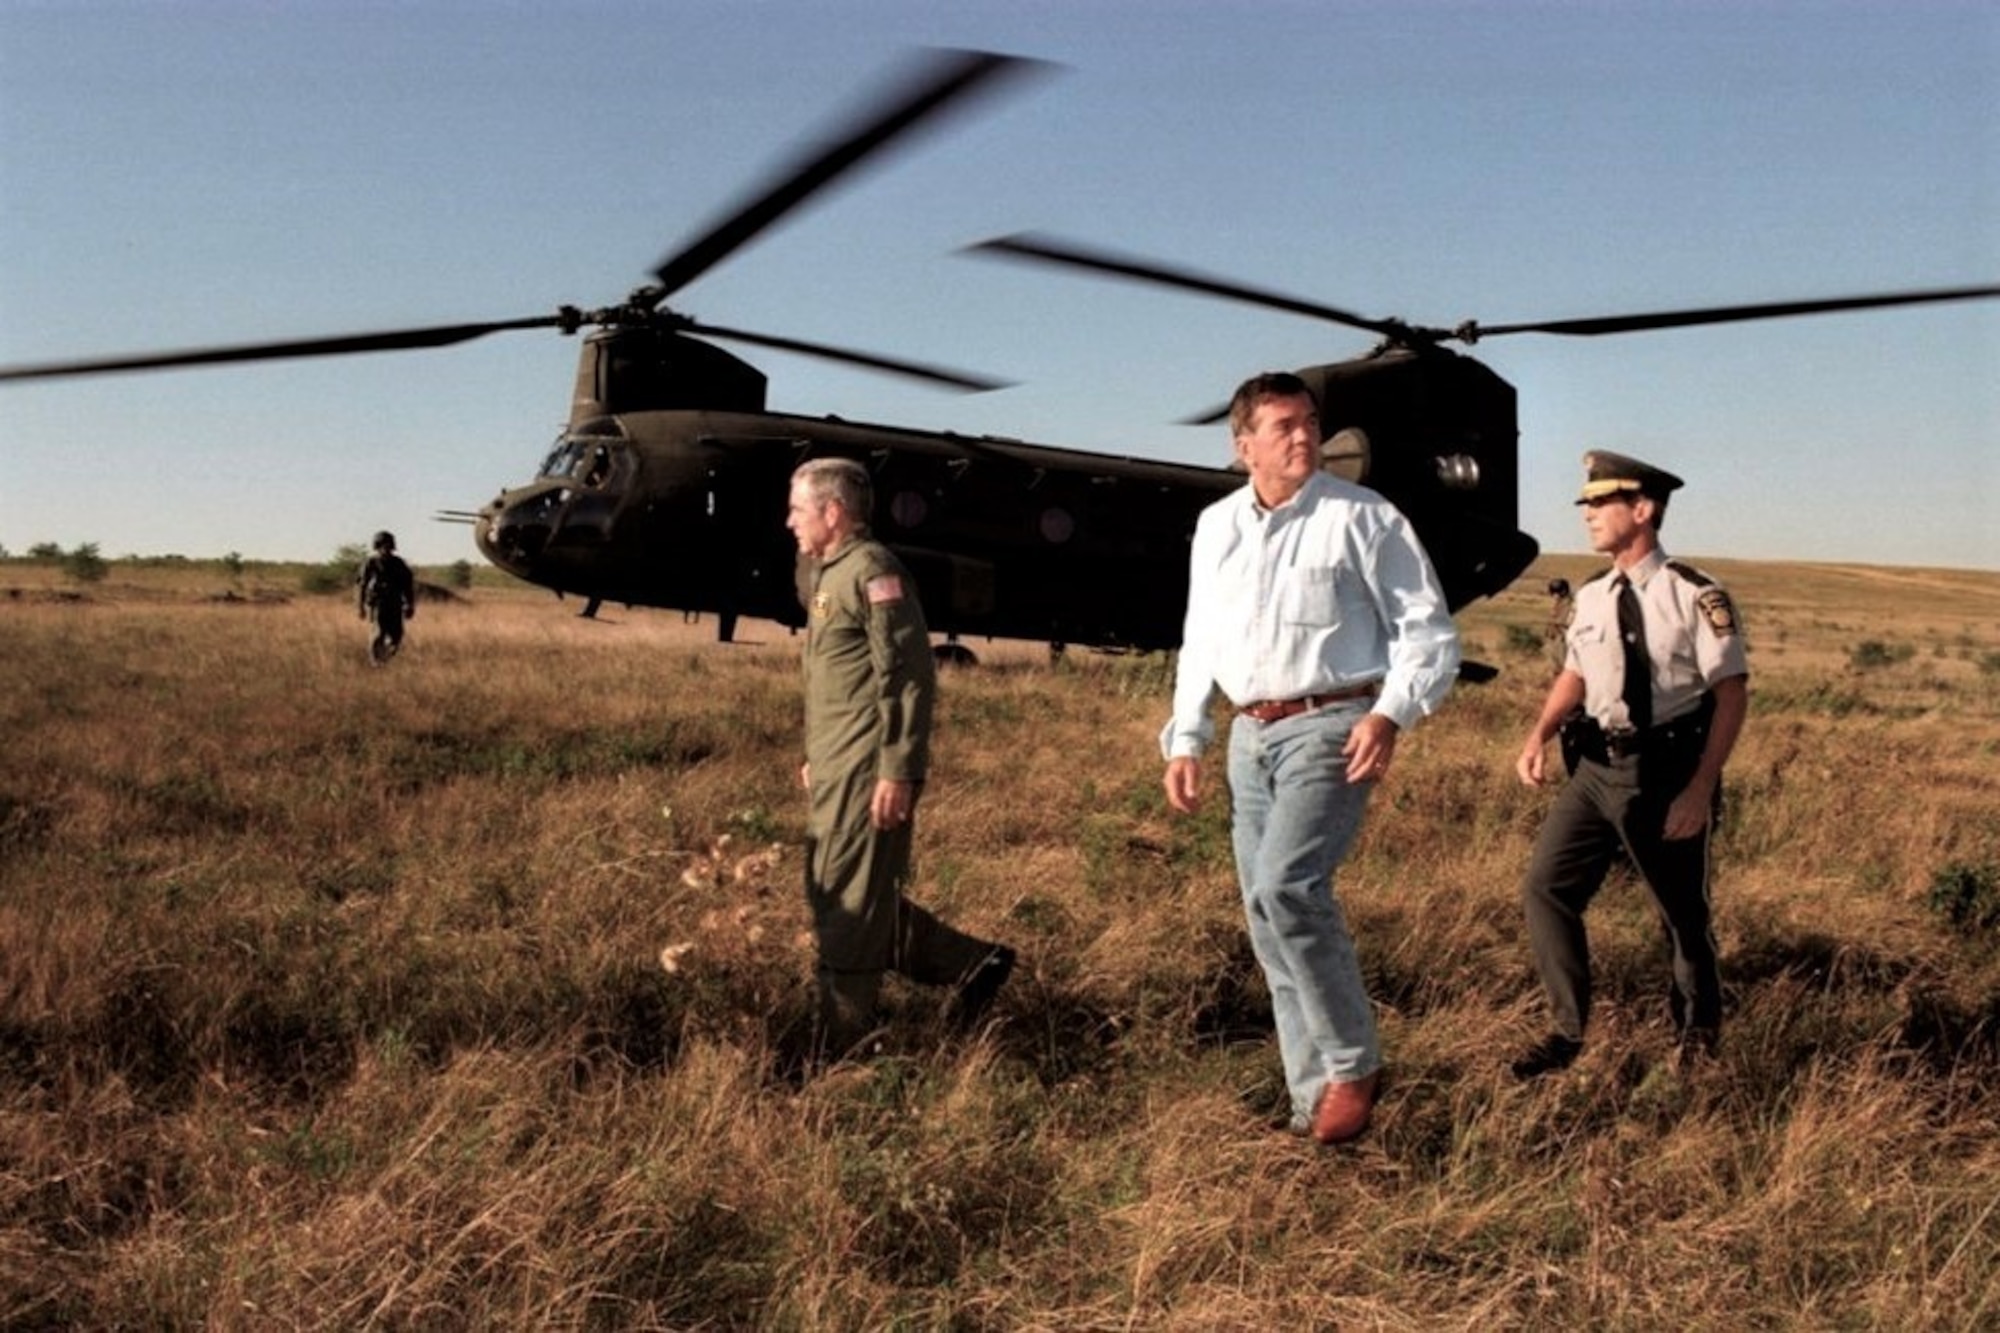 Left to right, Maj. Gen. William Lynch, Pennsylvania National Guard adjutant general; Pennsylvania Gov. Tom Ridge; and Pennsylvania State Police Commissioner Paul Evanko leave a CH-47 Chinook helicopter from the Pennsylvania National Guard's Company G, 104th Aviation Regiment, at the Flight 93 crash site in Somerset County, Pennsylvania, Sept. 11, 2001. (Photo by Terry Way/Commonwealth Media Services)